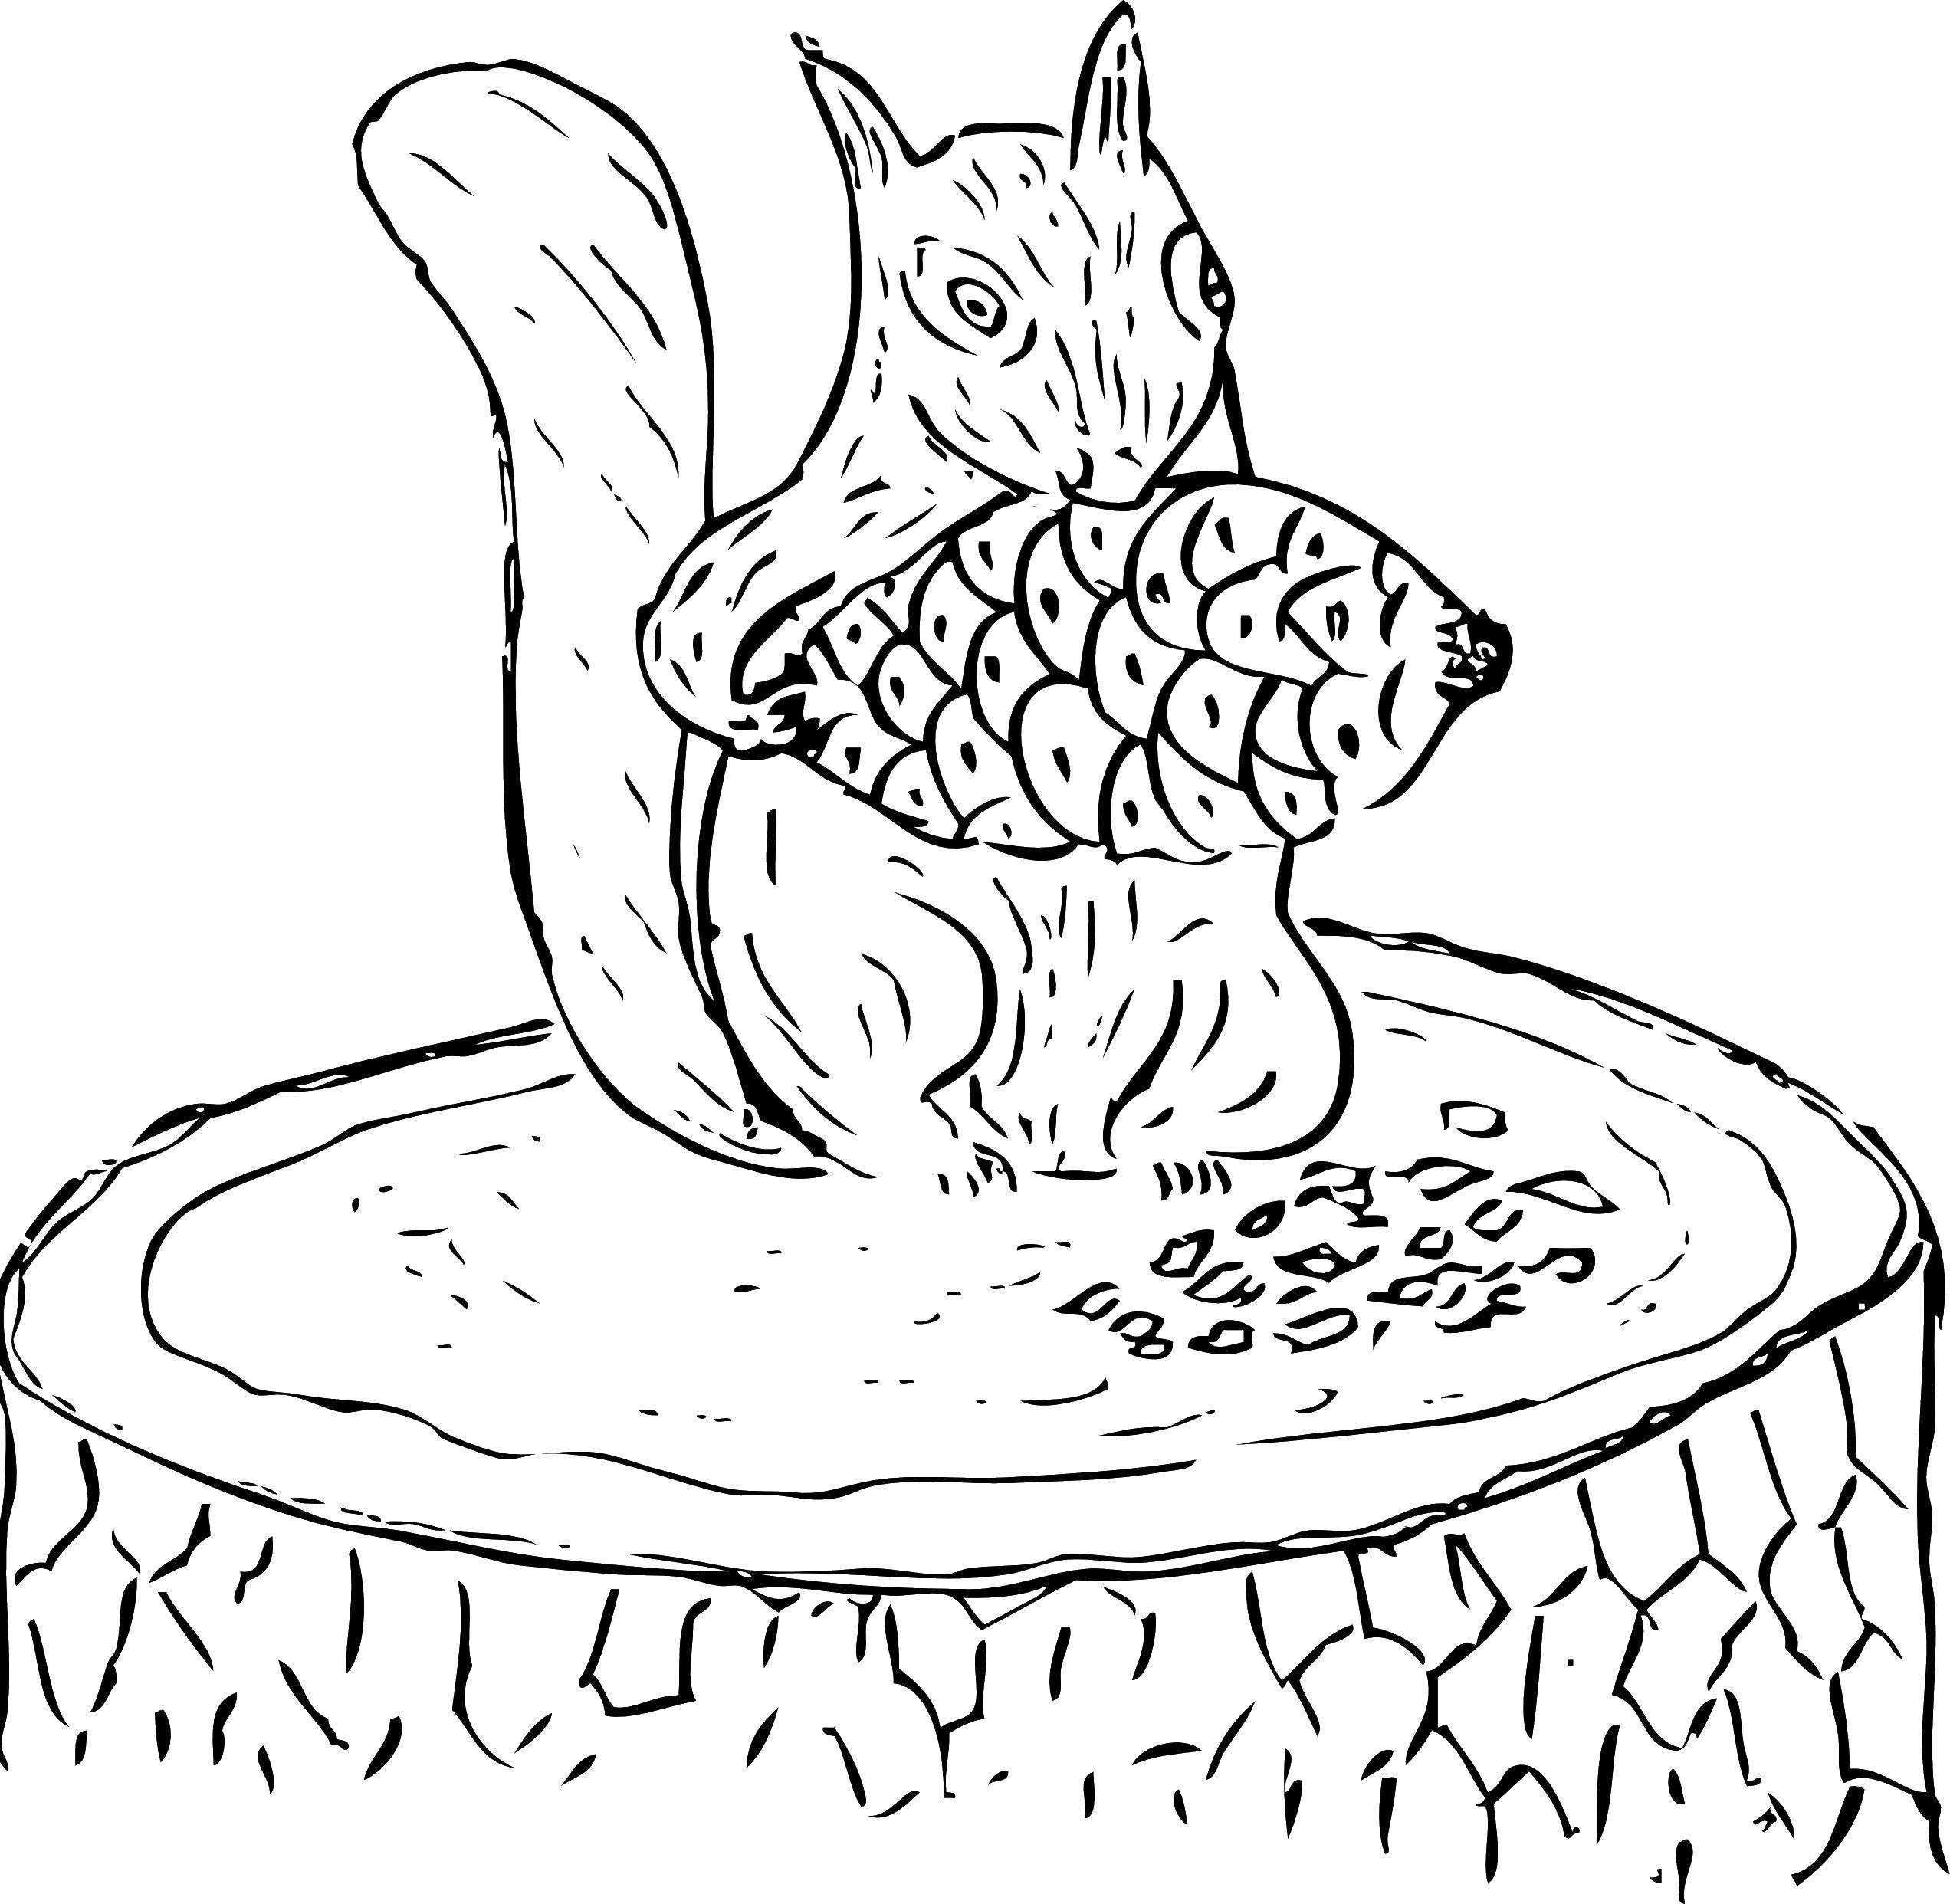 Coloring Squirrel with a nut. Category squirrel. Tags:  squirrel, nuts.